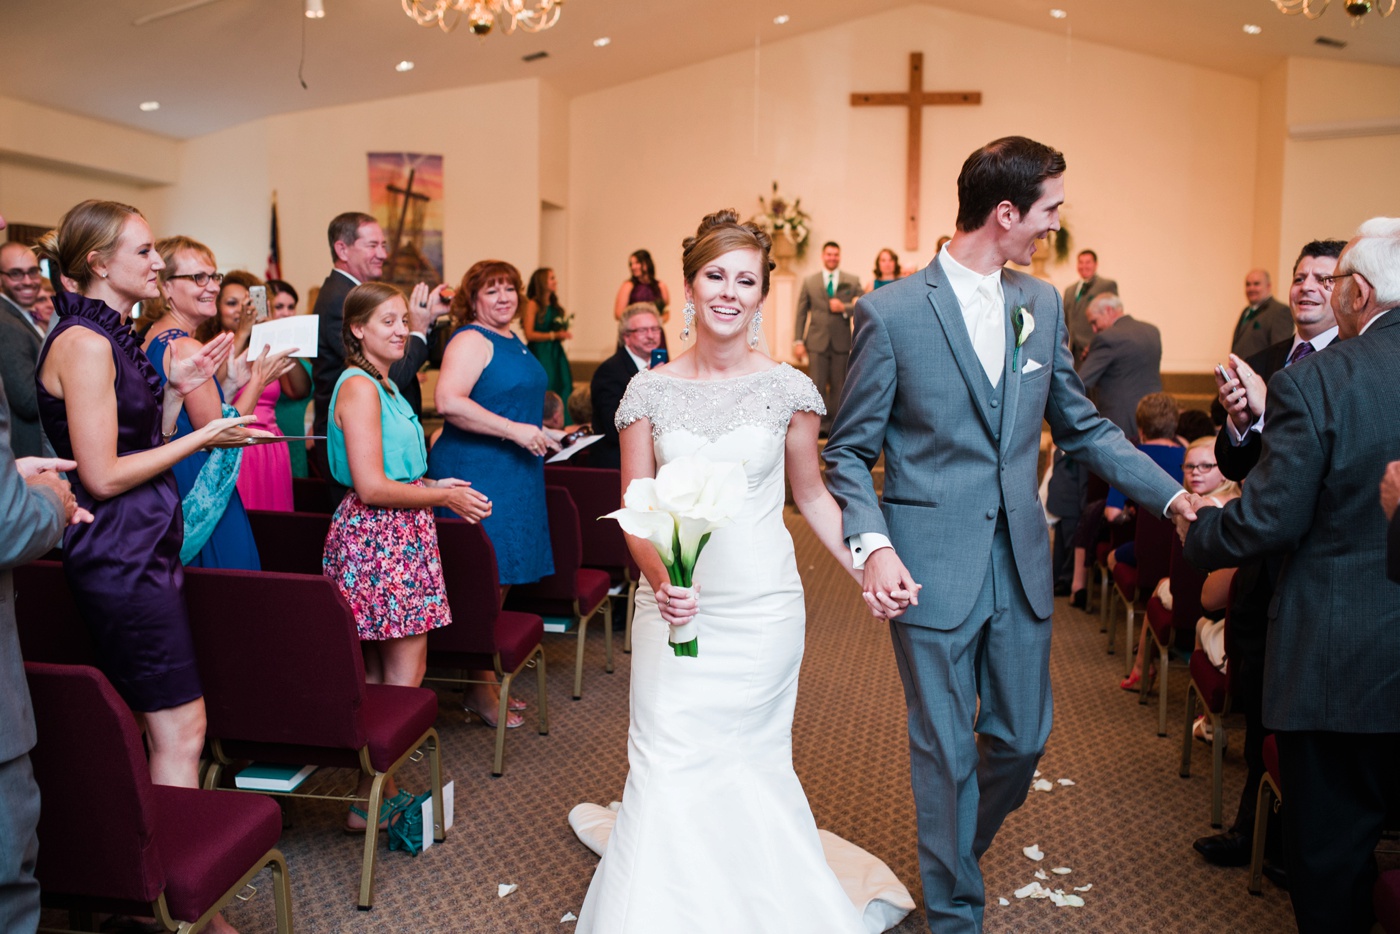 48 - Leslie + Eric - Paterson New Jersey Wedding Photographer - Alison Dunn Photography photo